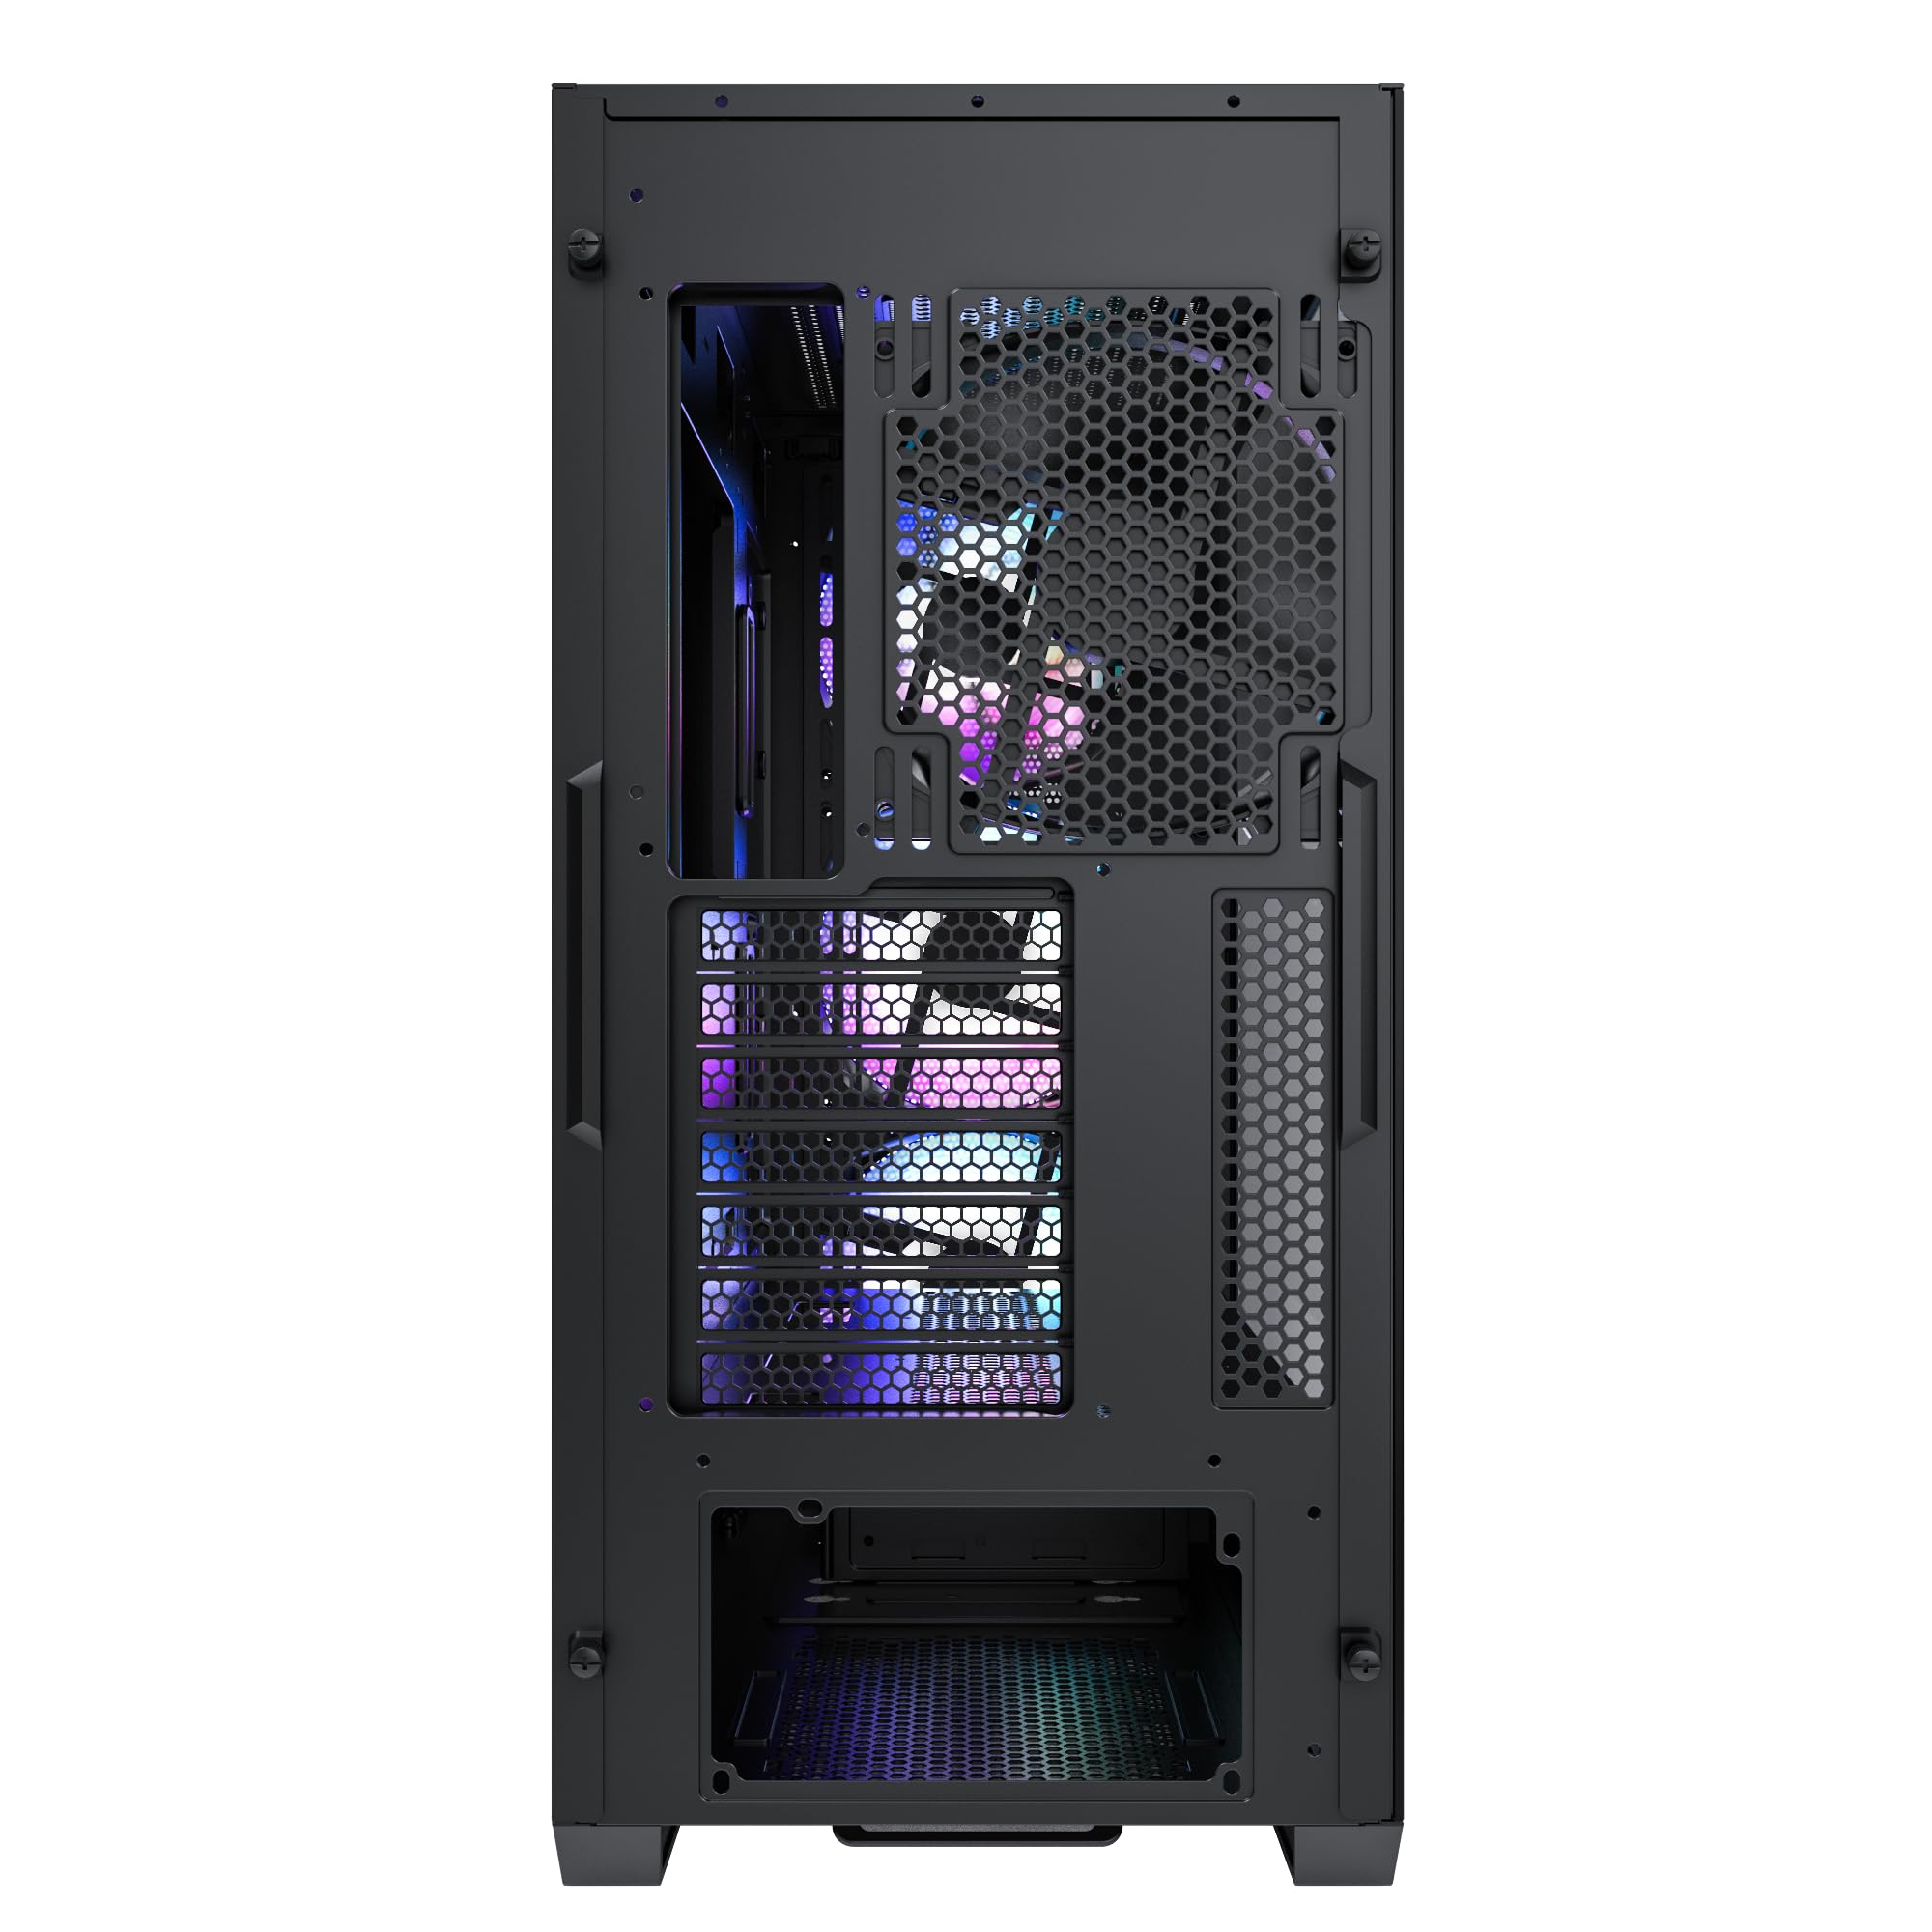 Montech AIR 903 MAX, E-ATX Mid Tower Case, High Airflow, 3X 140mm ARGB PWM & 1x 140mm PWM Fans Pre-Installed, Tempered Glass Side Panel, Mesh Front, Type-C, Support 4090 GPUs, Black